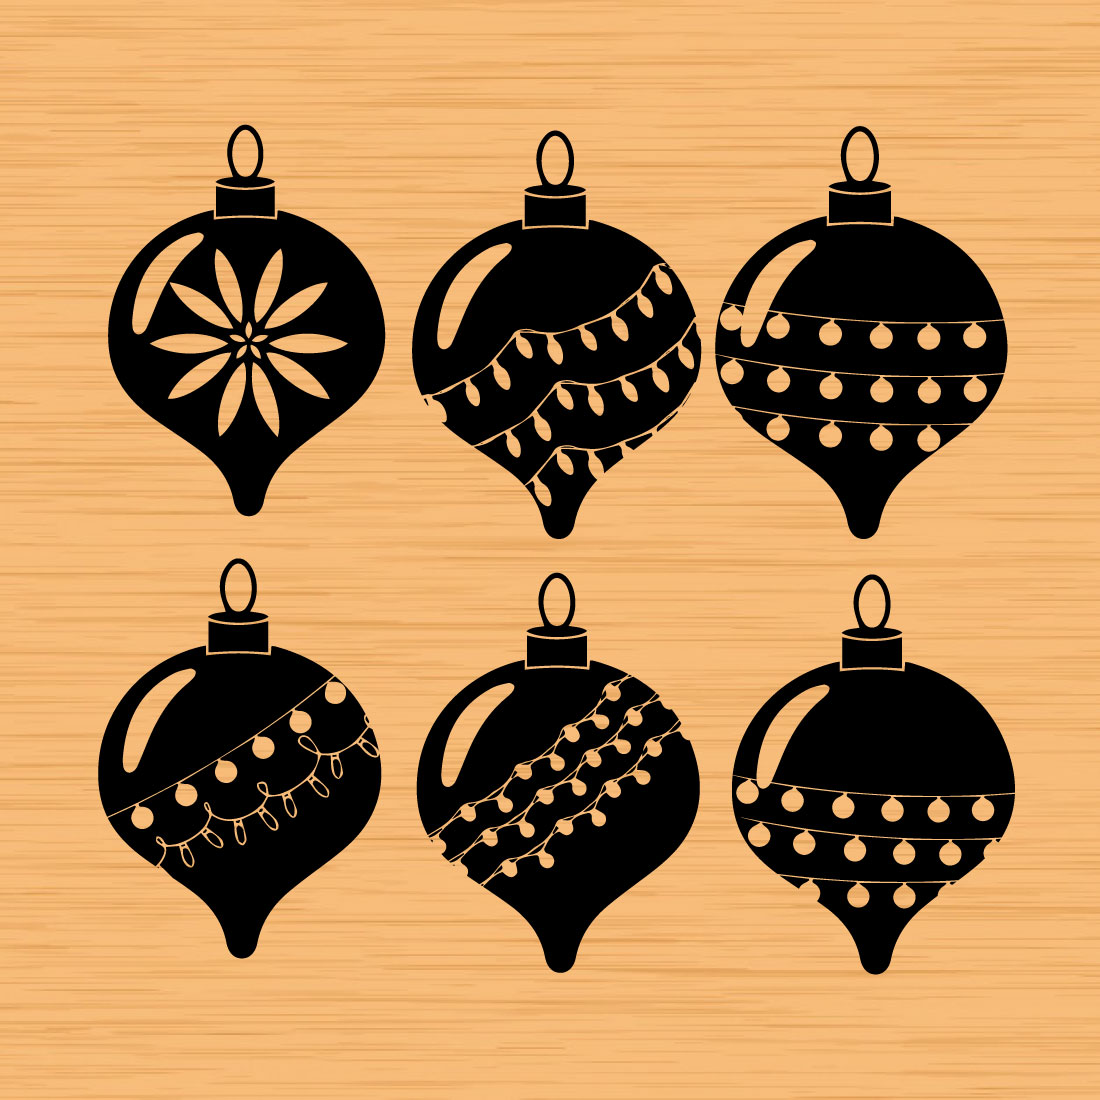 Set of black adorable images of Christmas tree ornaments